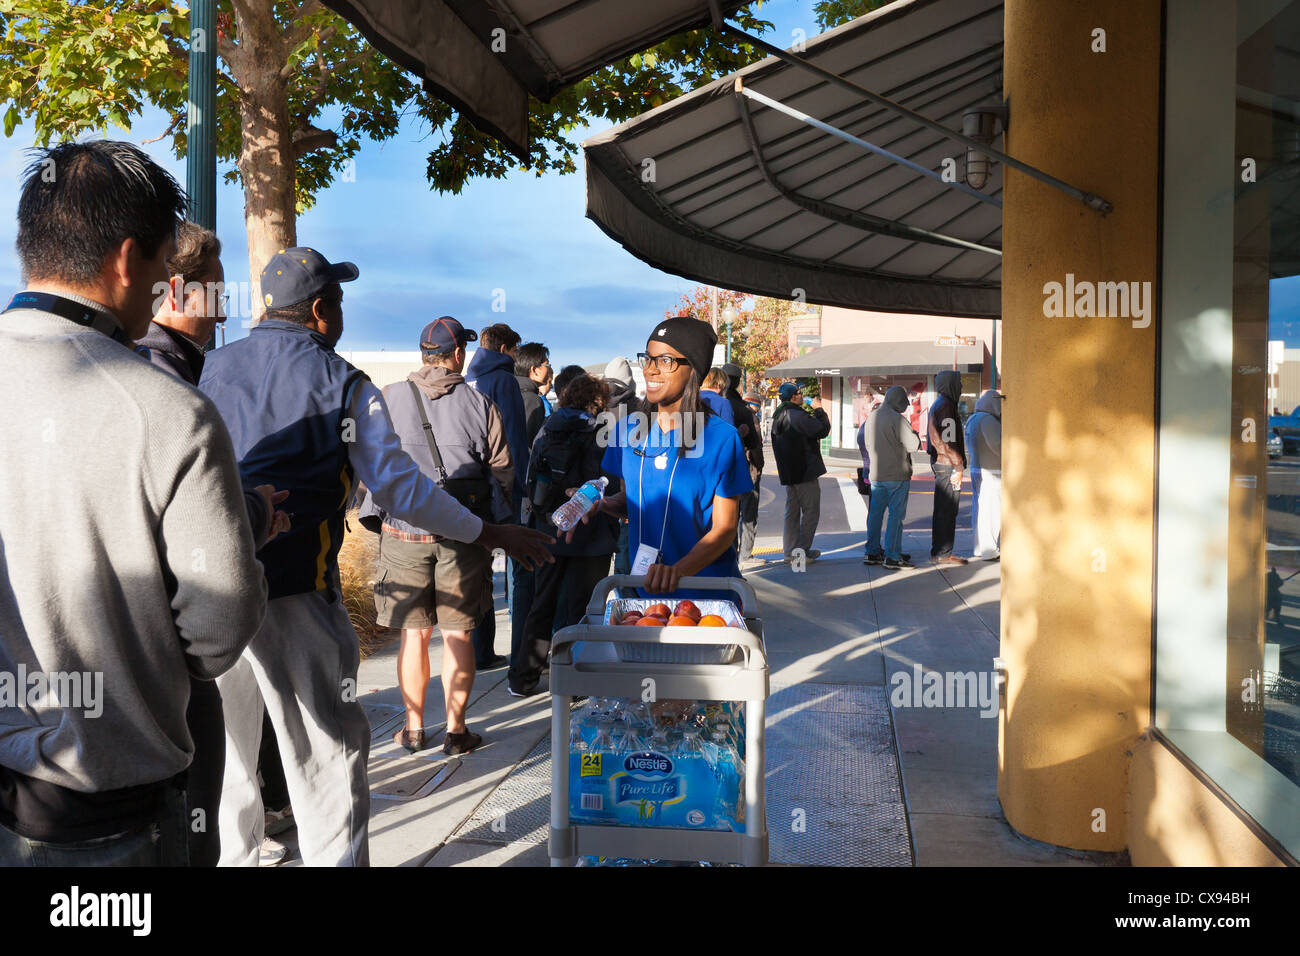 Sept. 21, 2012 Apple employee offers free food to customers in line to buy the new iPhone 5 at the Apple store in Berkeley, CA Stock Photo